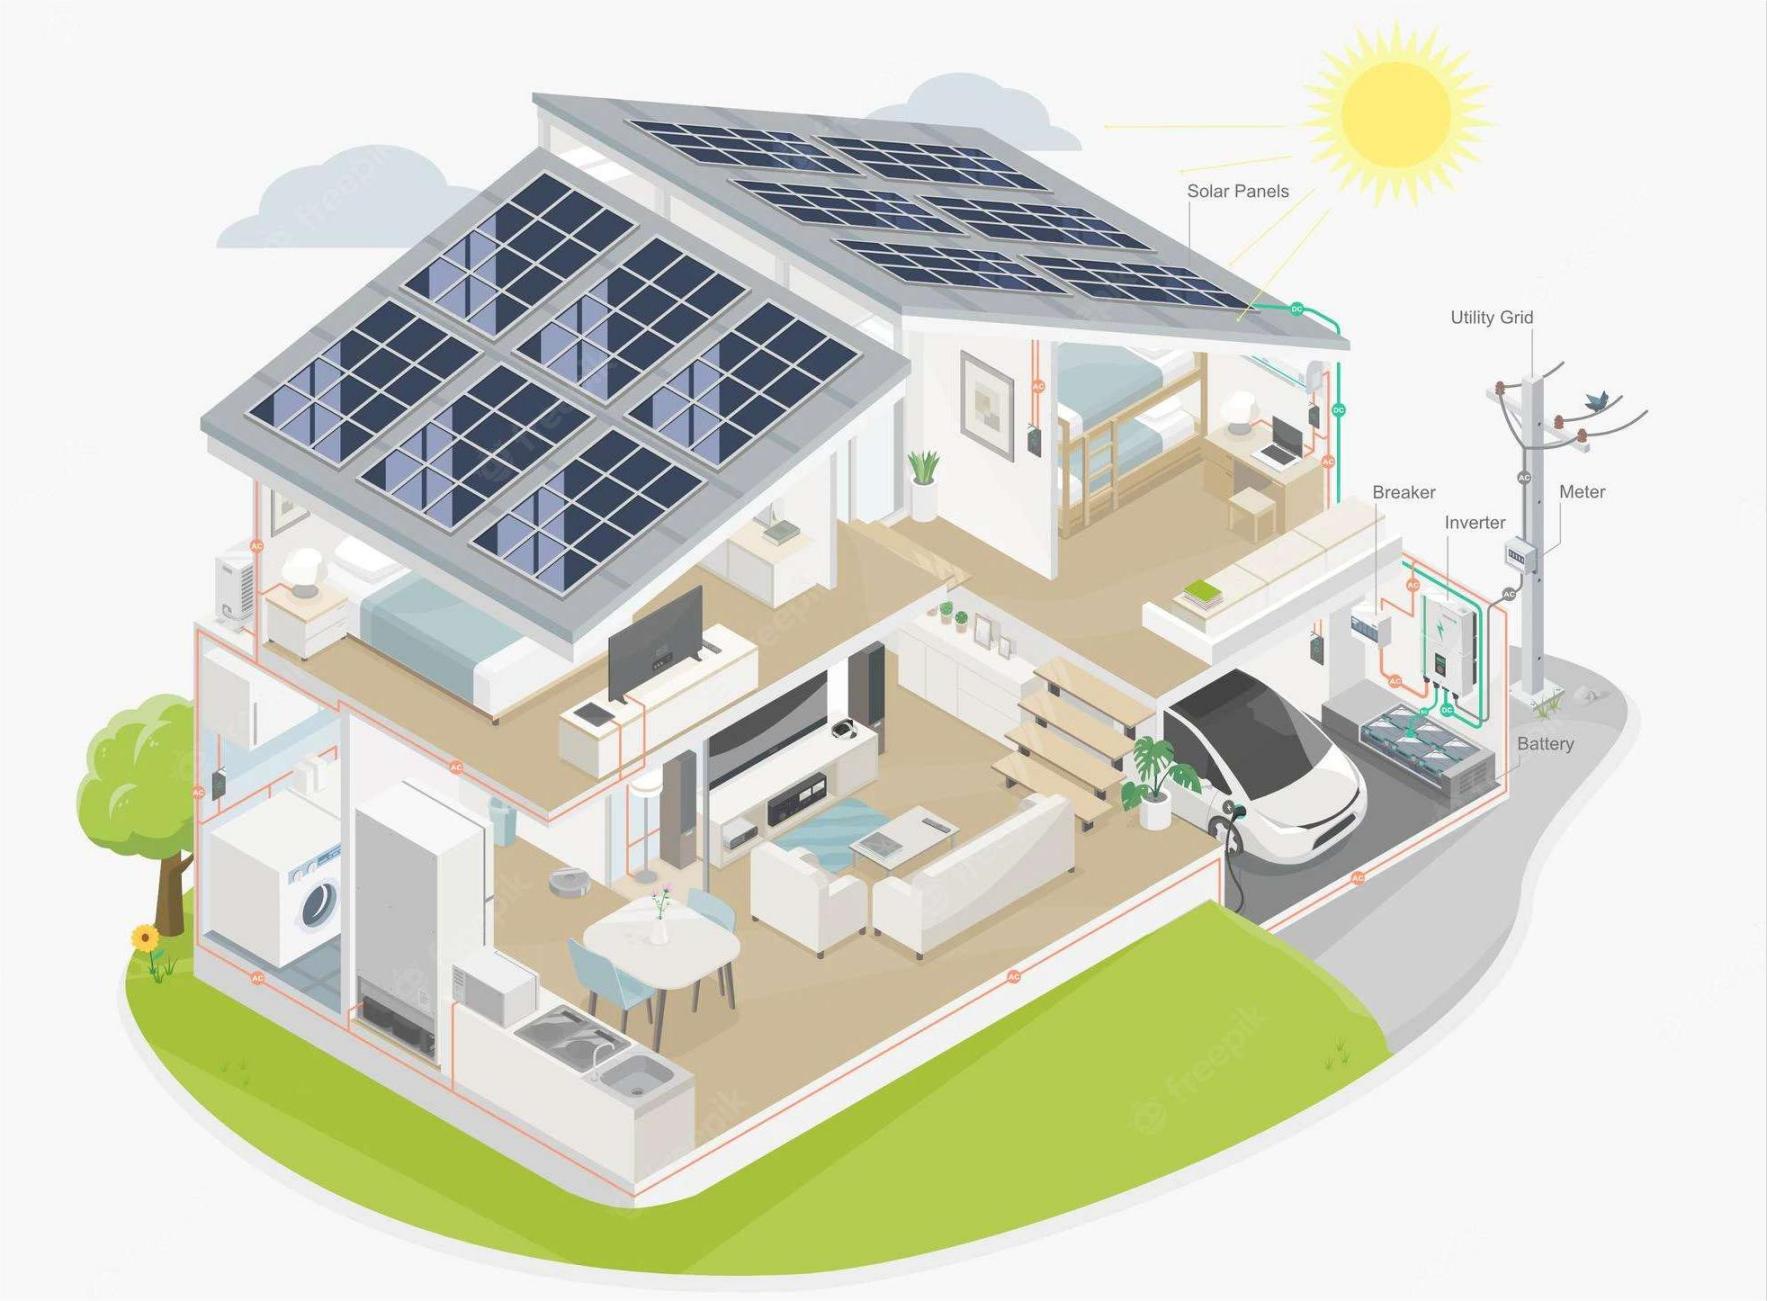 Detailed Functions of Residential Photovoltaic Energy Storage Inverter System